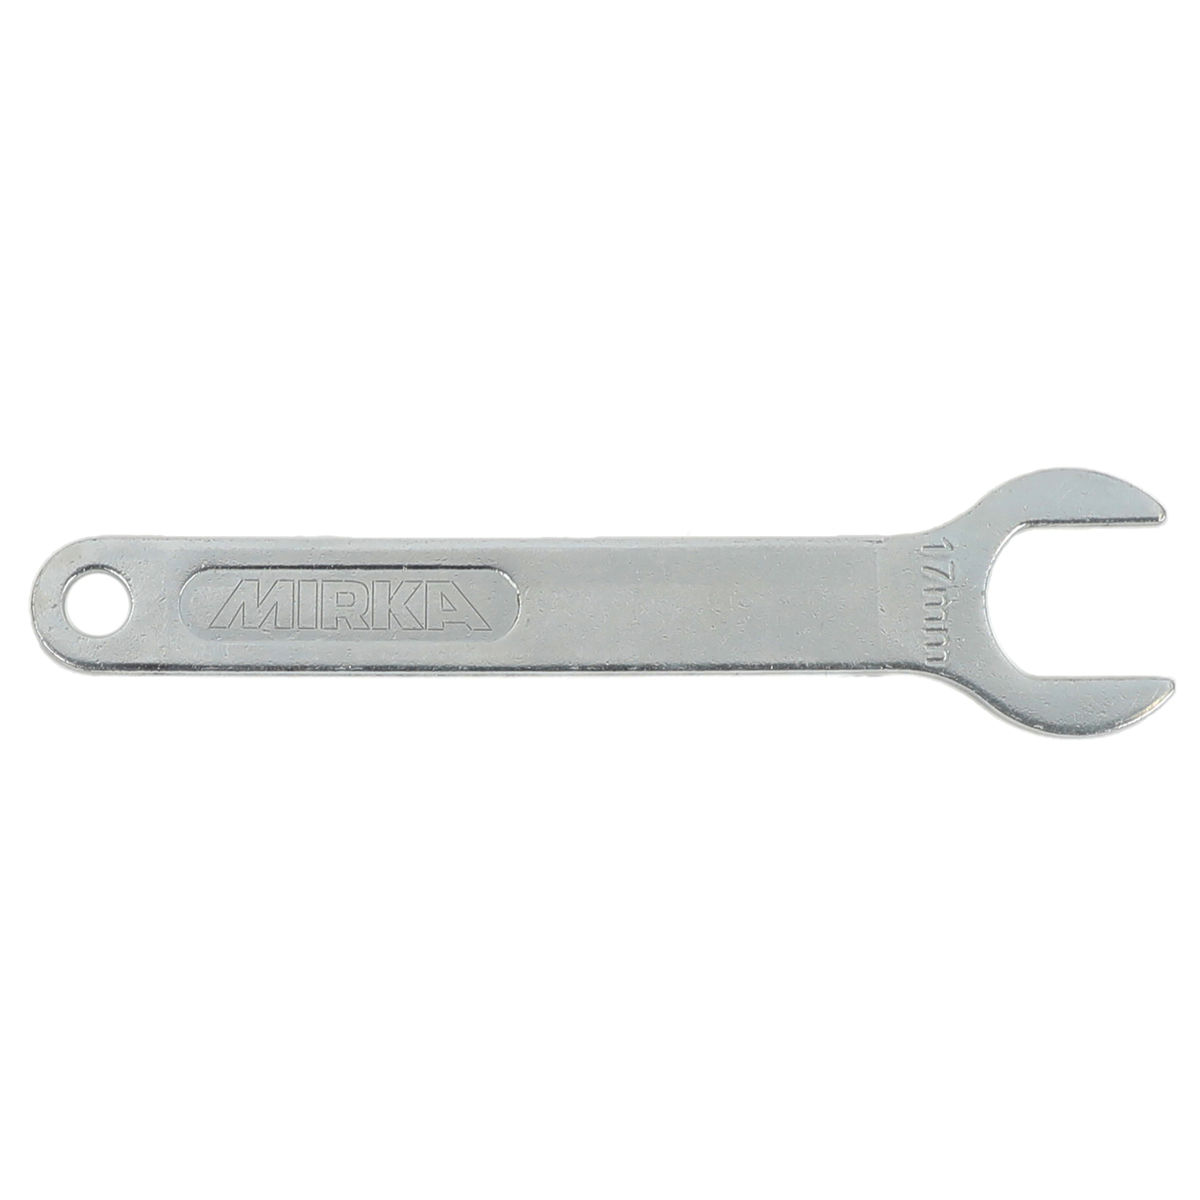 Pad Wrench 17mm for 77mm machines